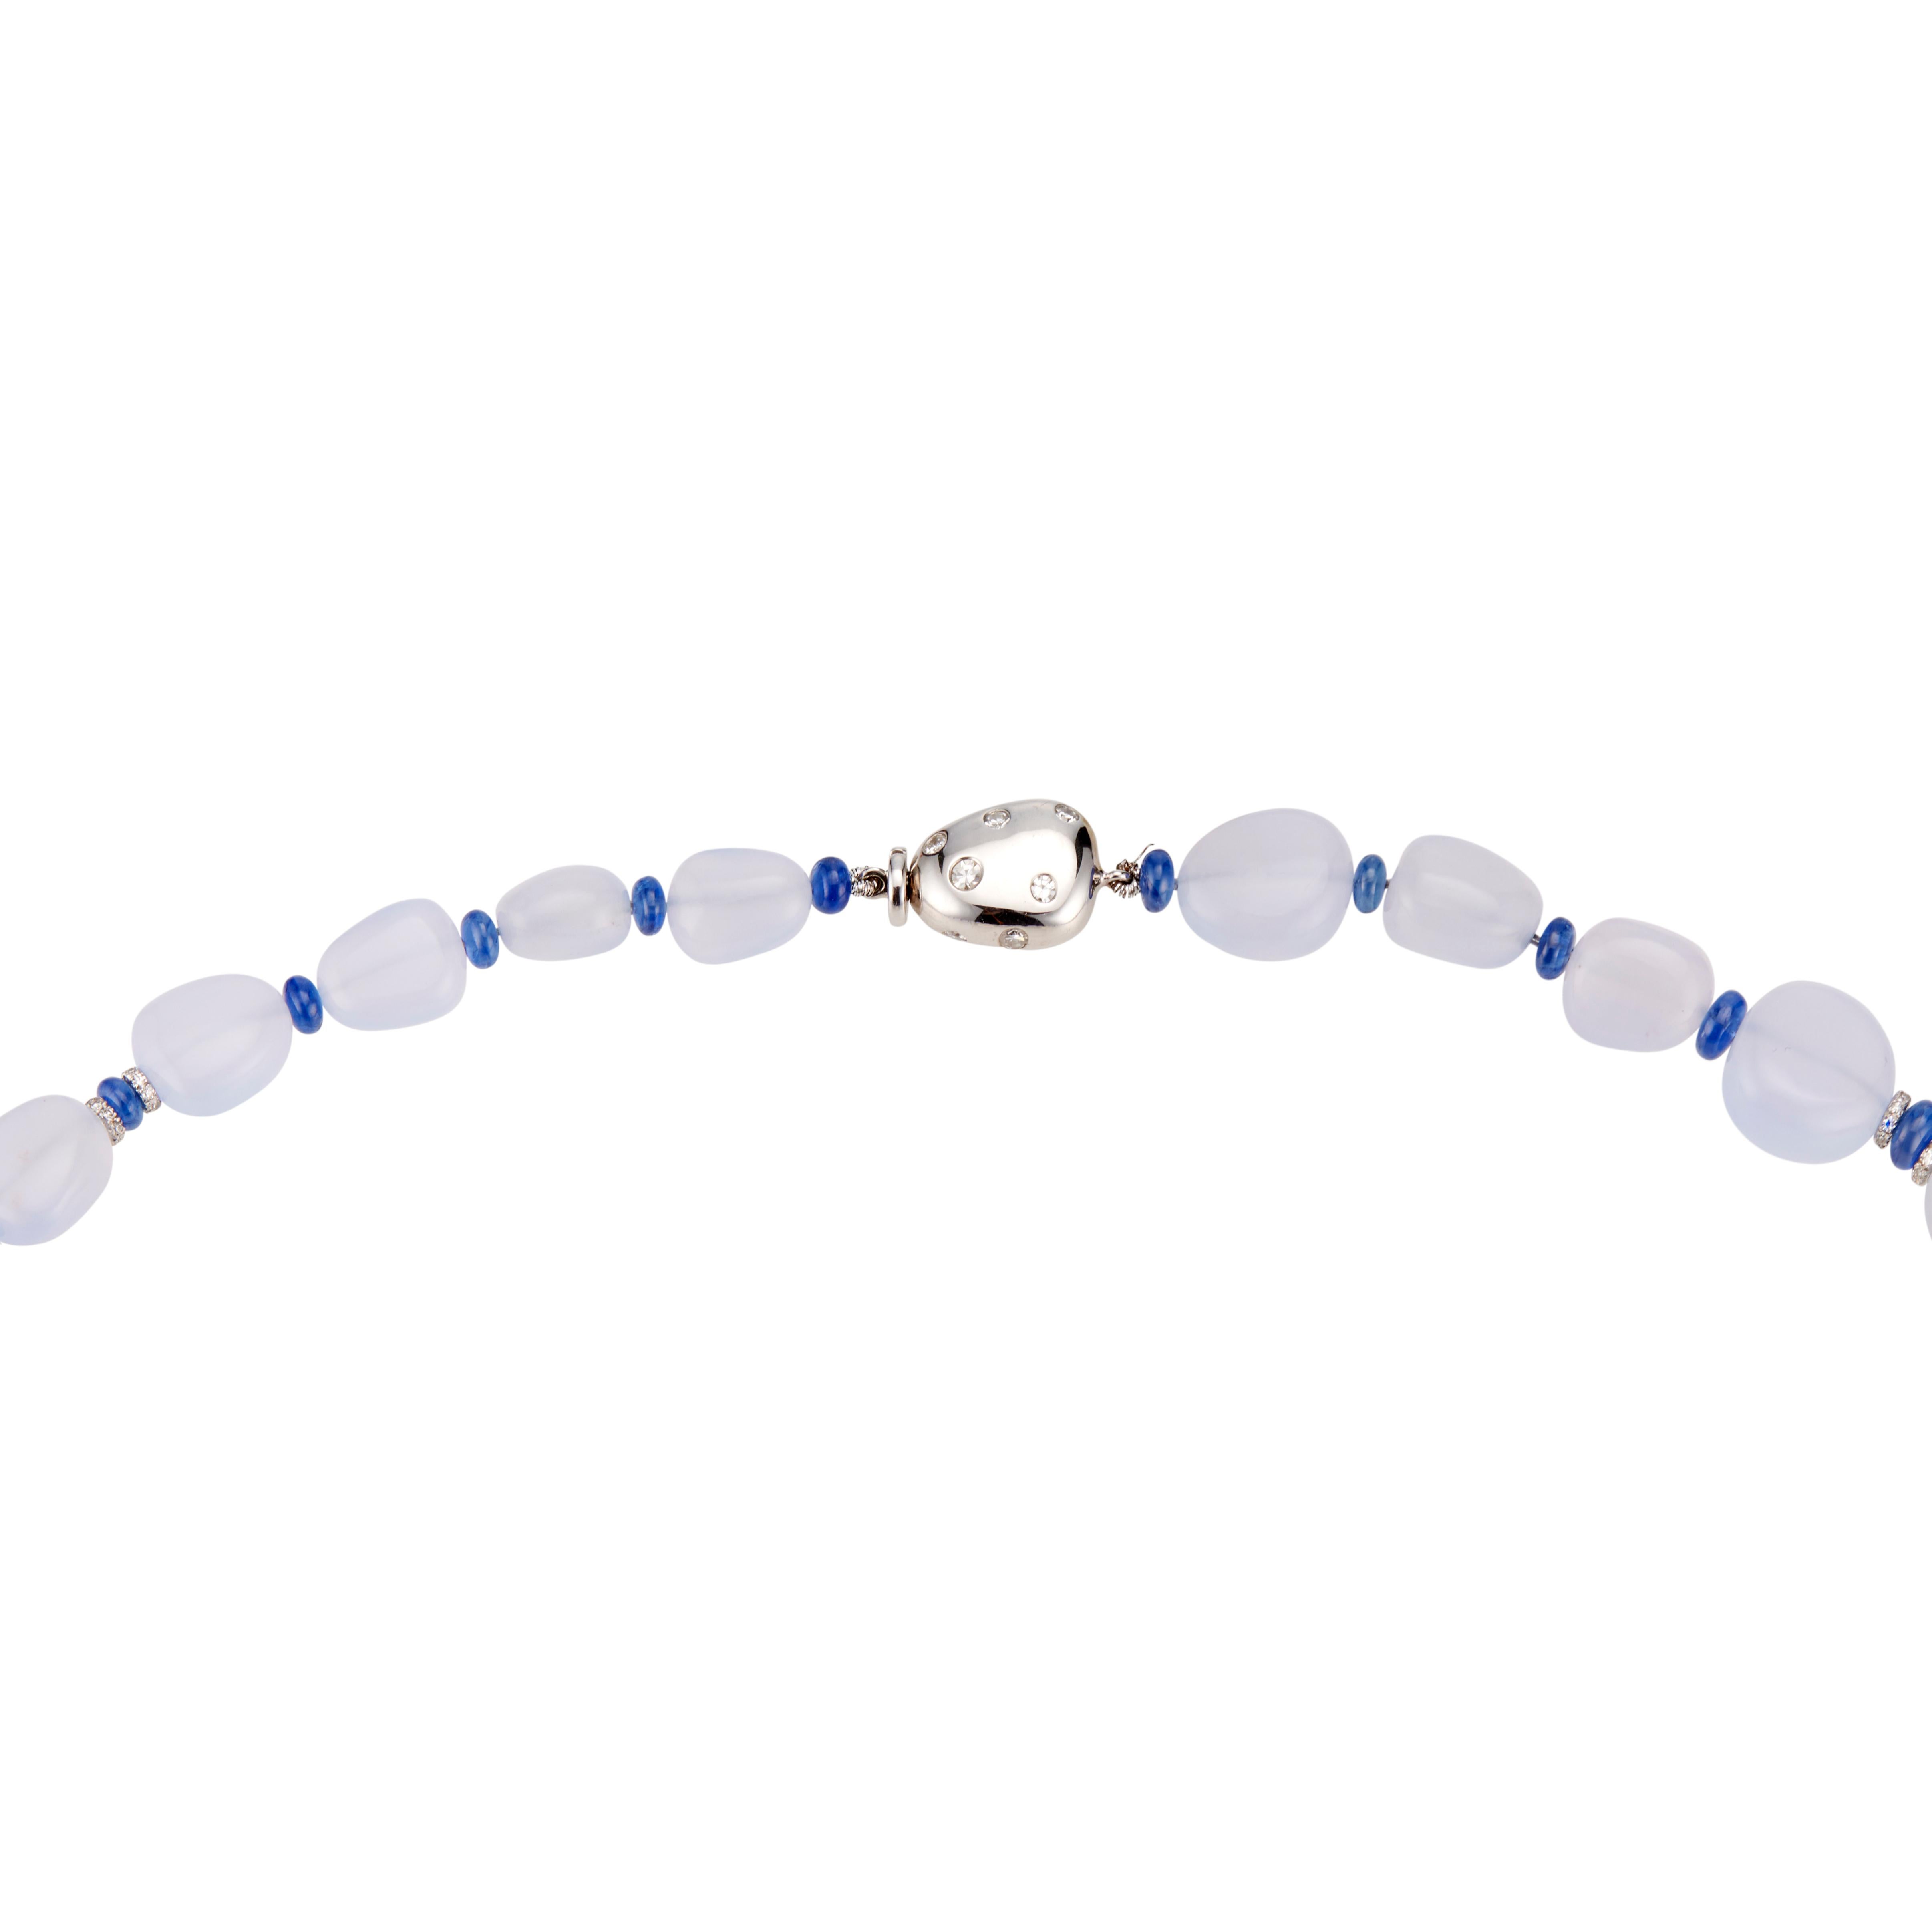 Translucent blue natural chalcedony beads with with genuine sapphire separators and 18k white gold rondells with round brilliant cut diamonds. 18k white gold diamond catch. 26 inches 

43 pale blue chalcedony beads
44 blue sapphire rondell beads